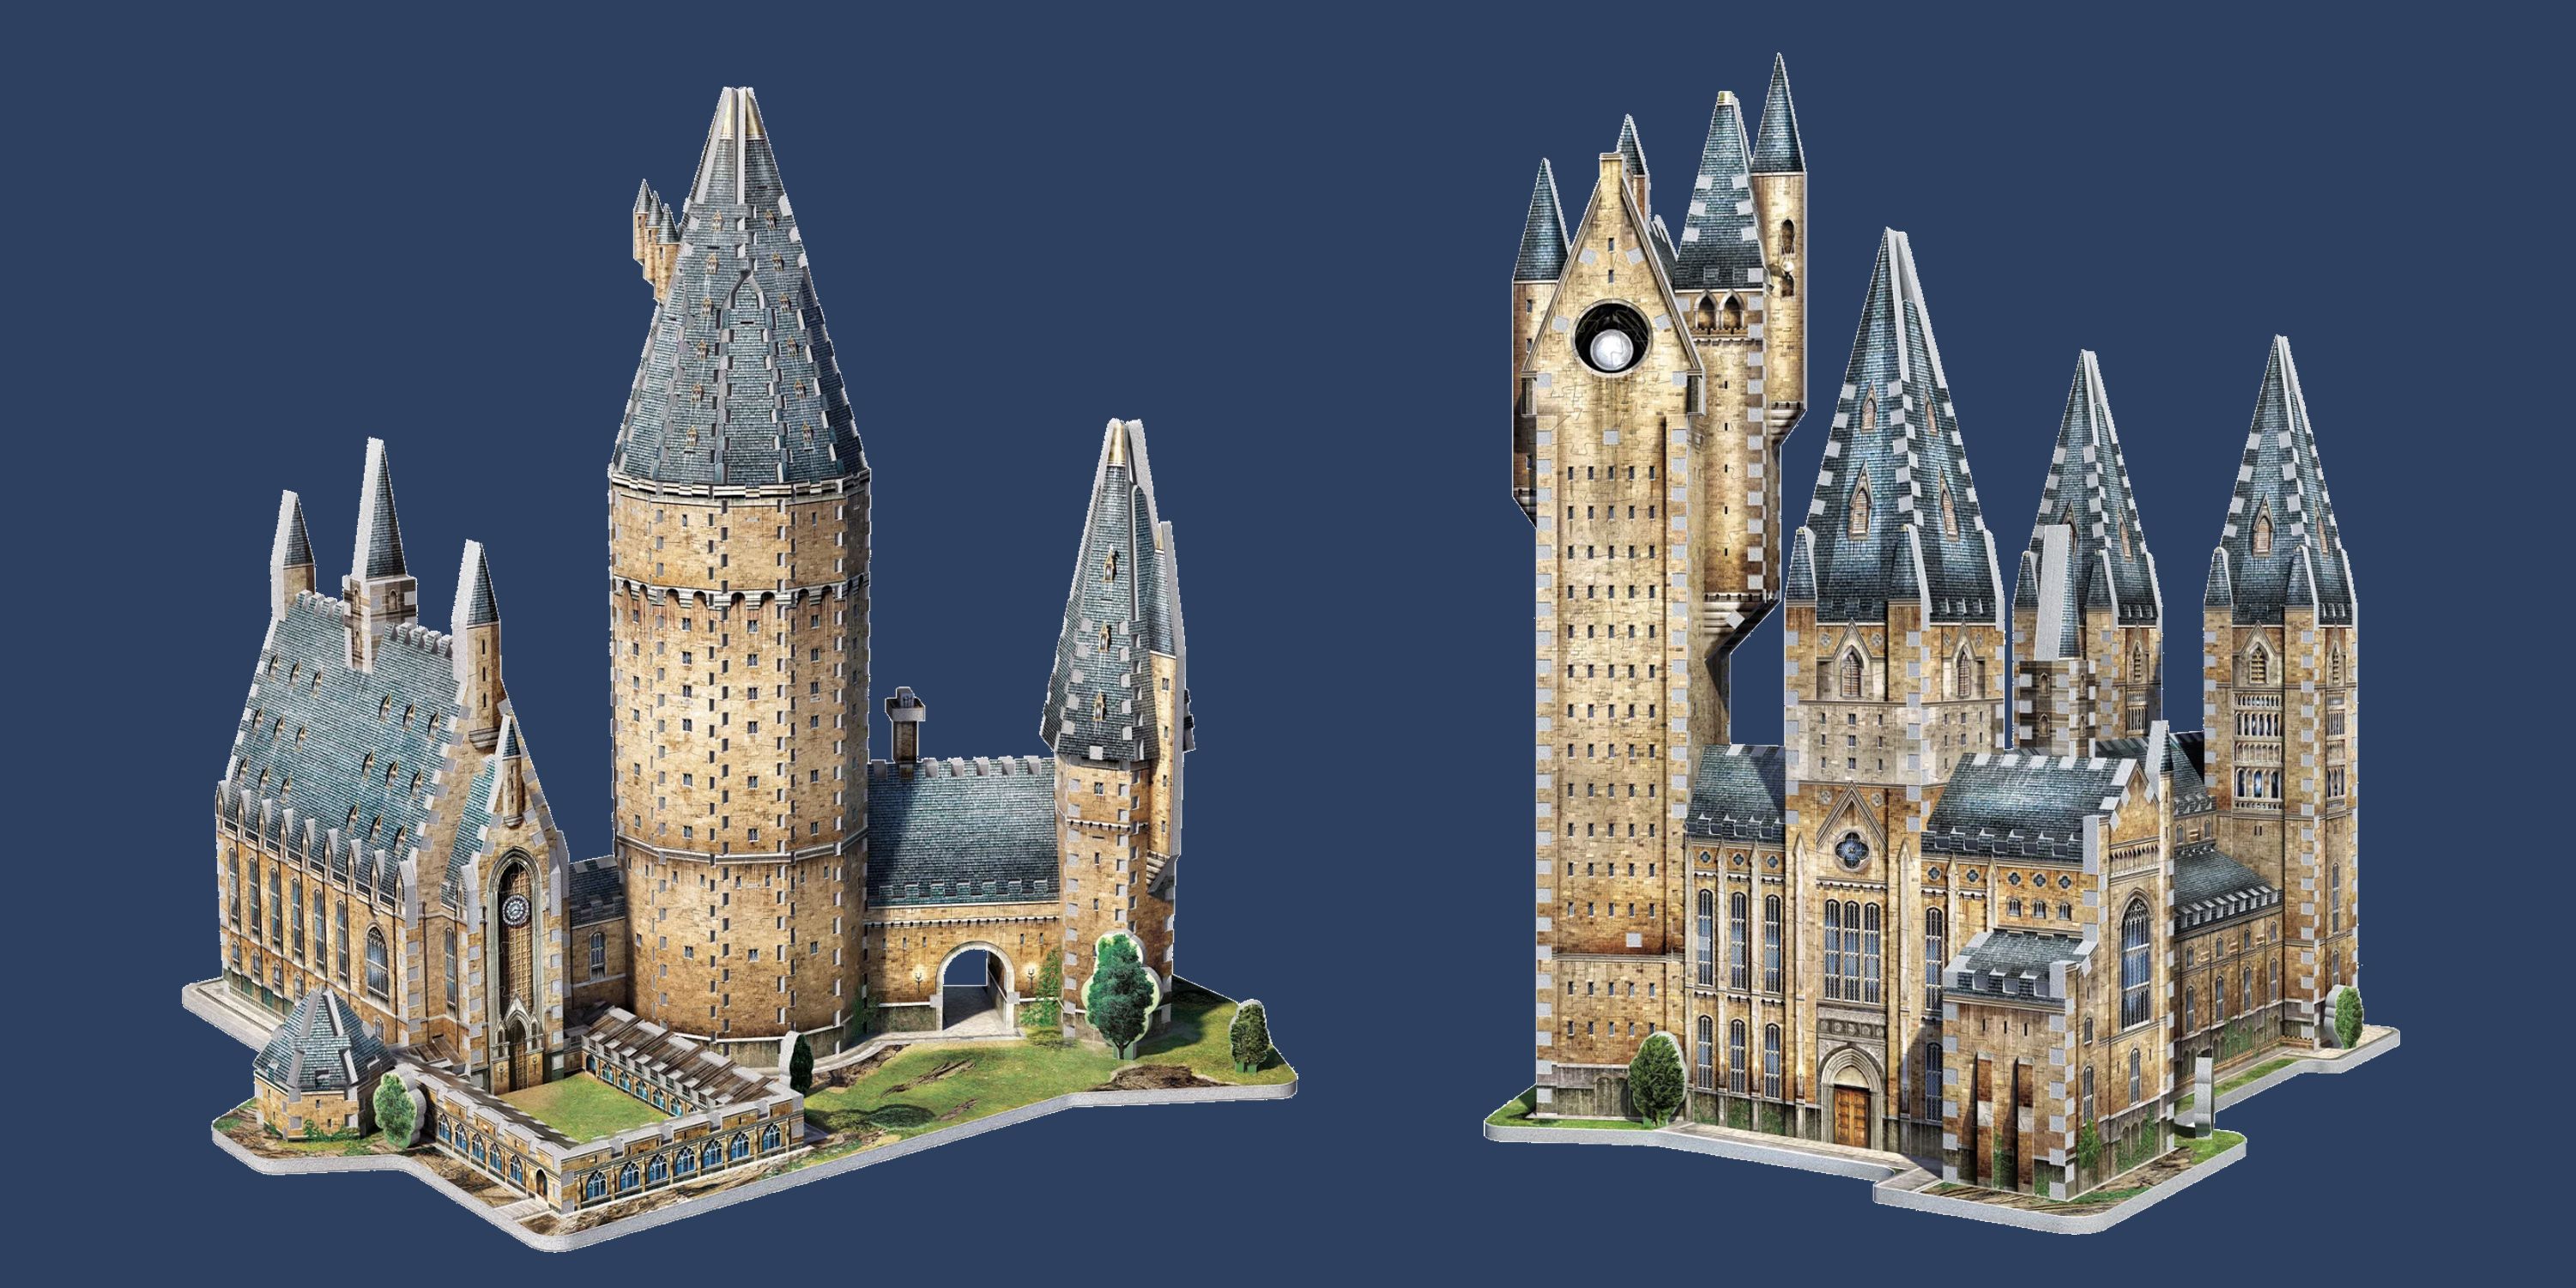 The Great Hall Harry Potter Hogwarts Castle 3-D Puzzles 